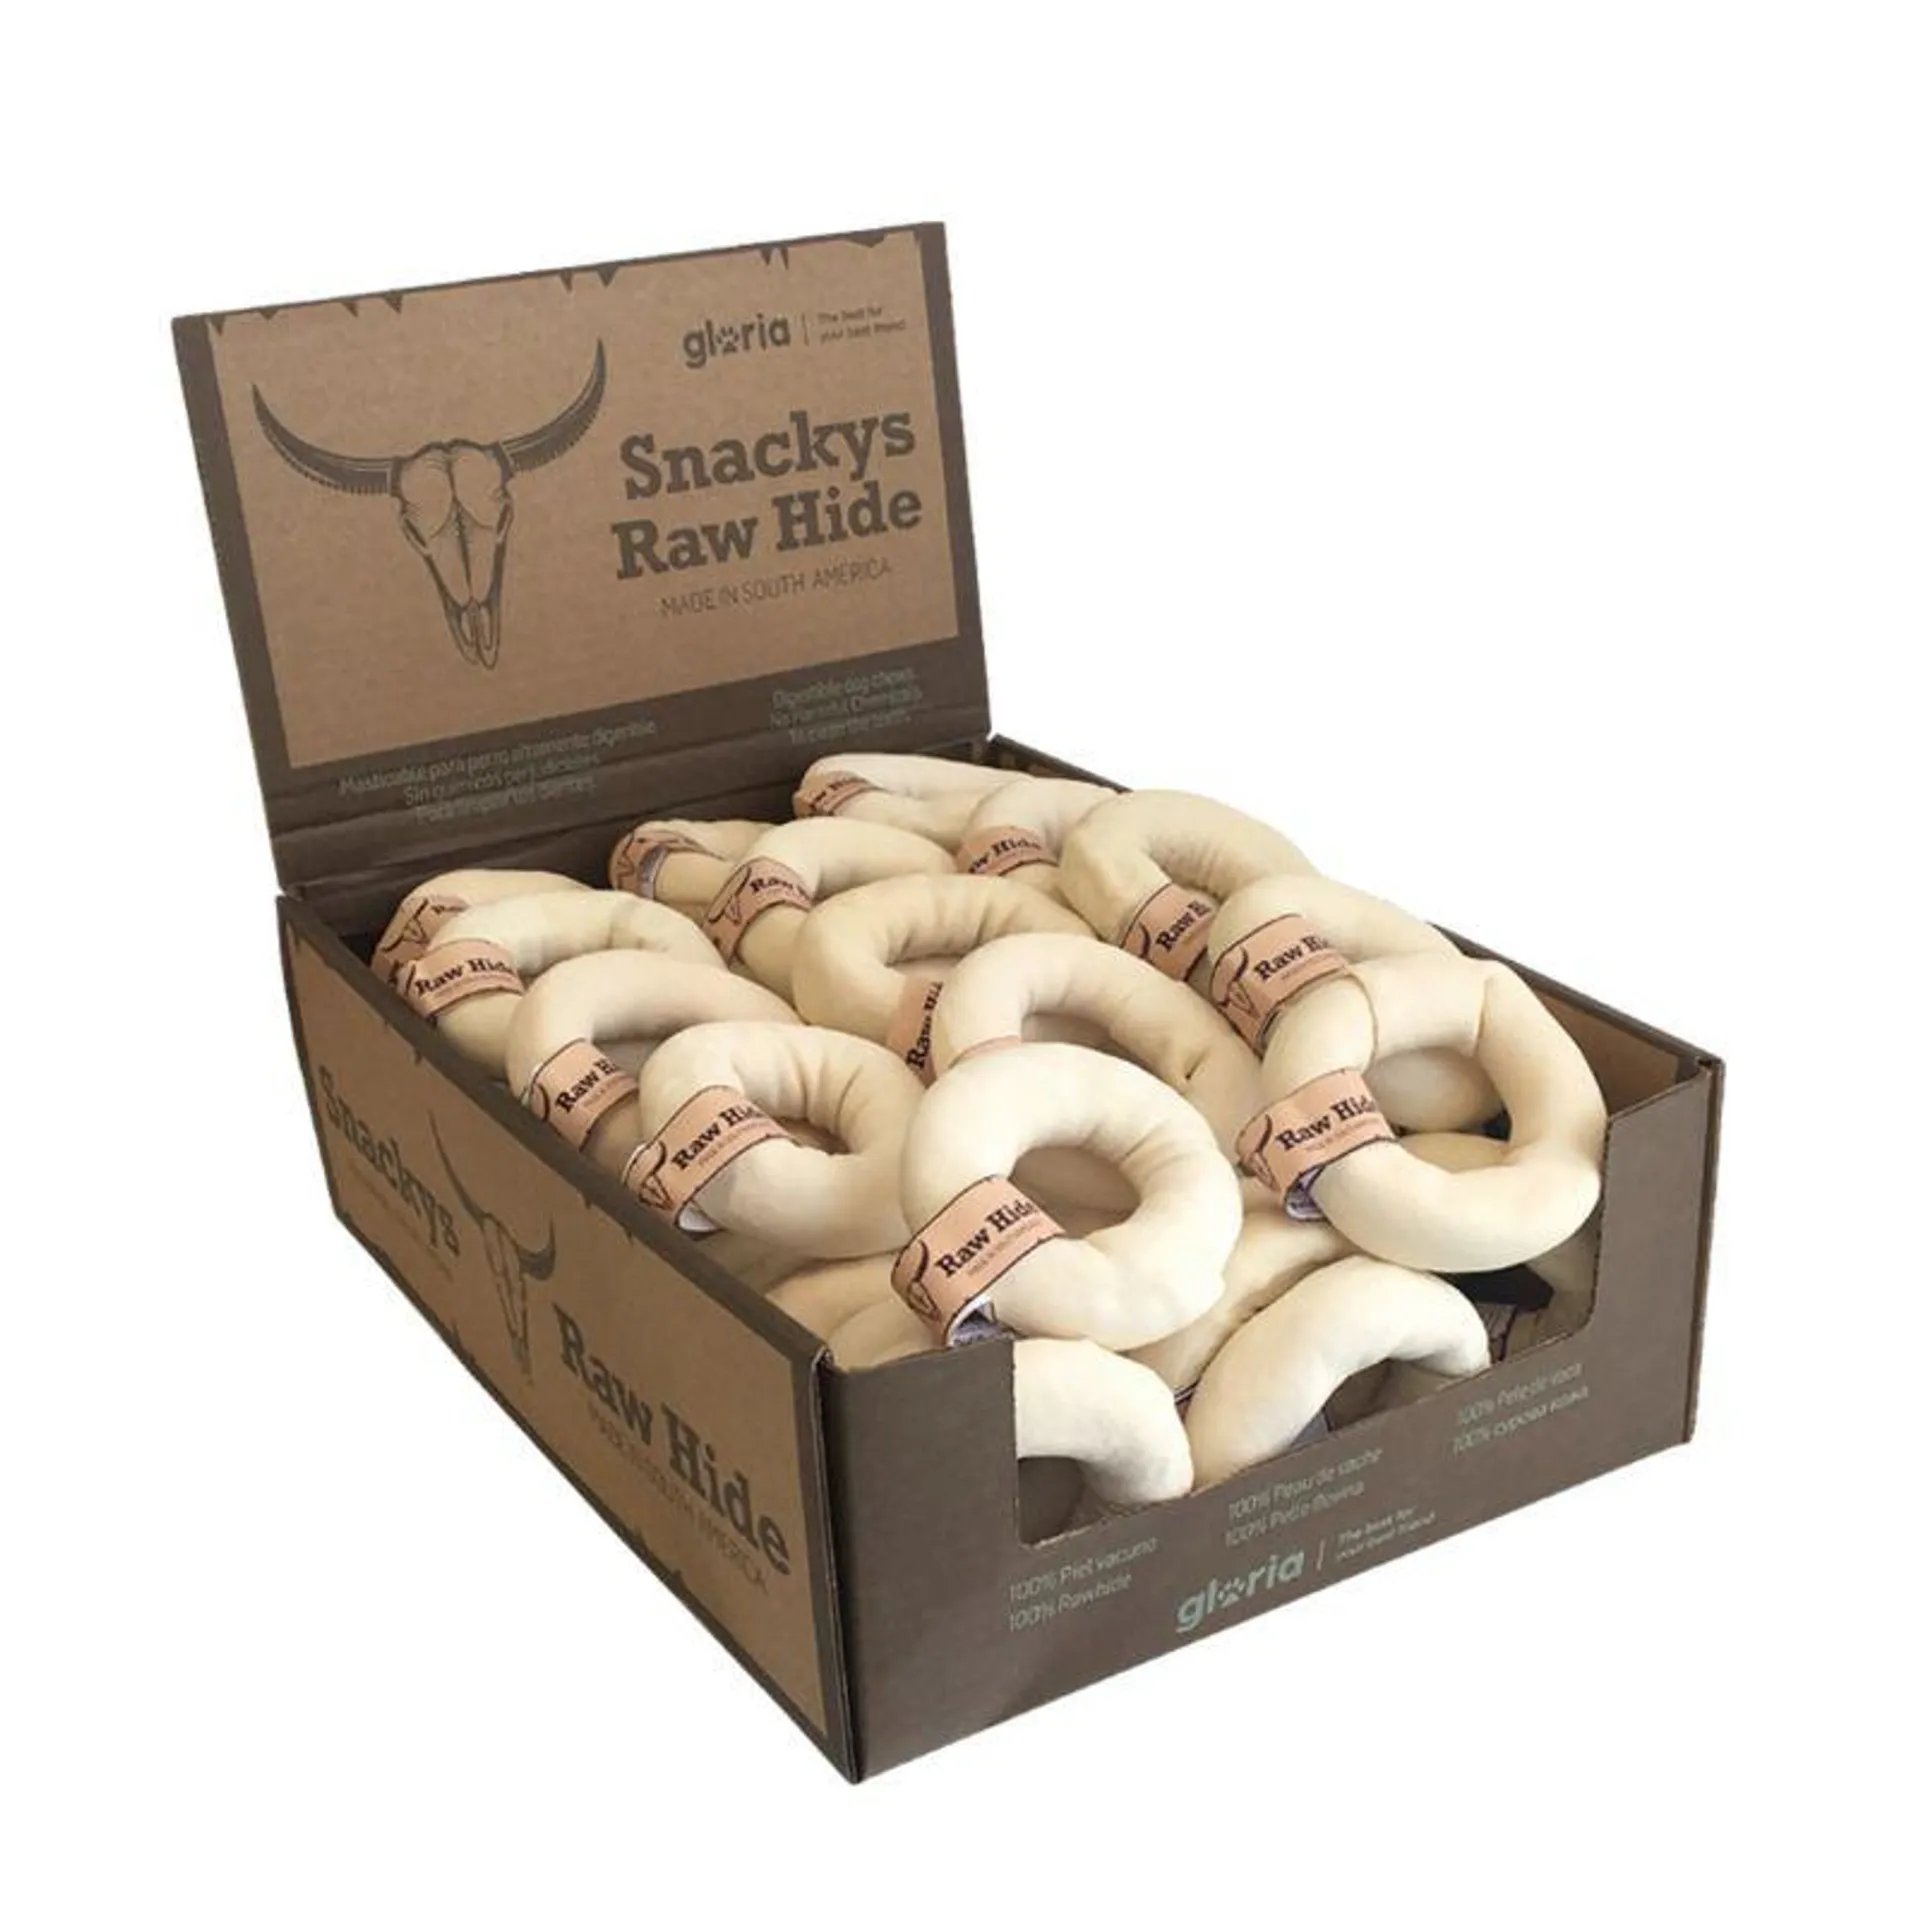 Snackys rawhide masticable donut 8-9cm